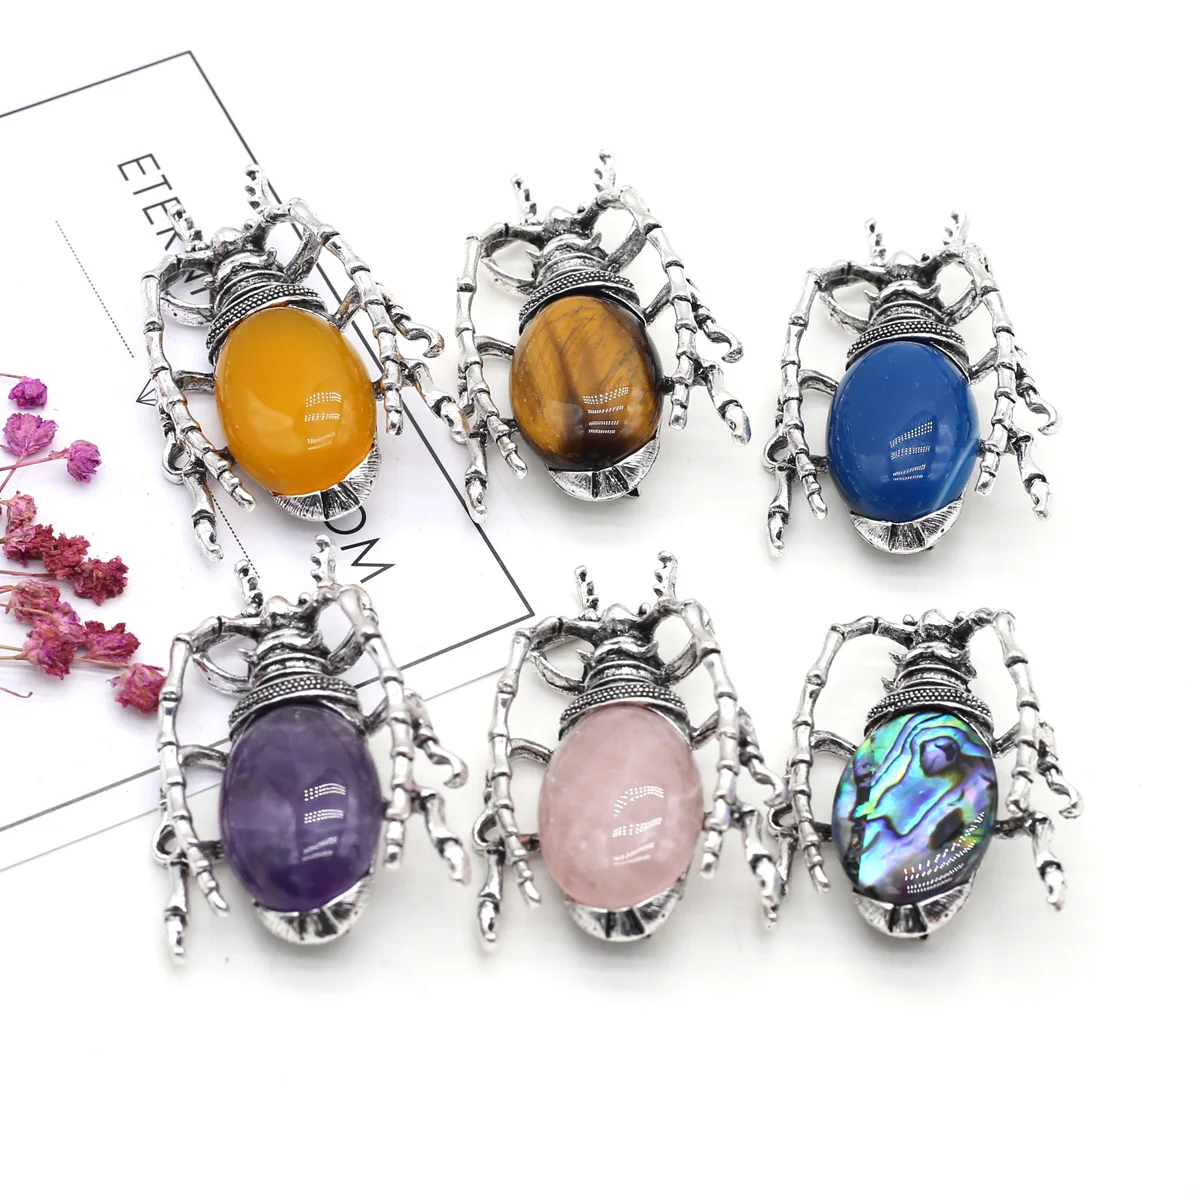 

1PC Oval Natural Stone Pendant Rose Quartz Opal Agate Beetle Healing Crystals Charms for Jewelry Making DIY Necklace Earrings